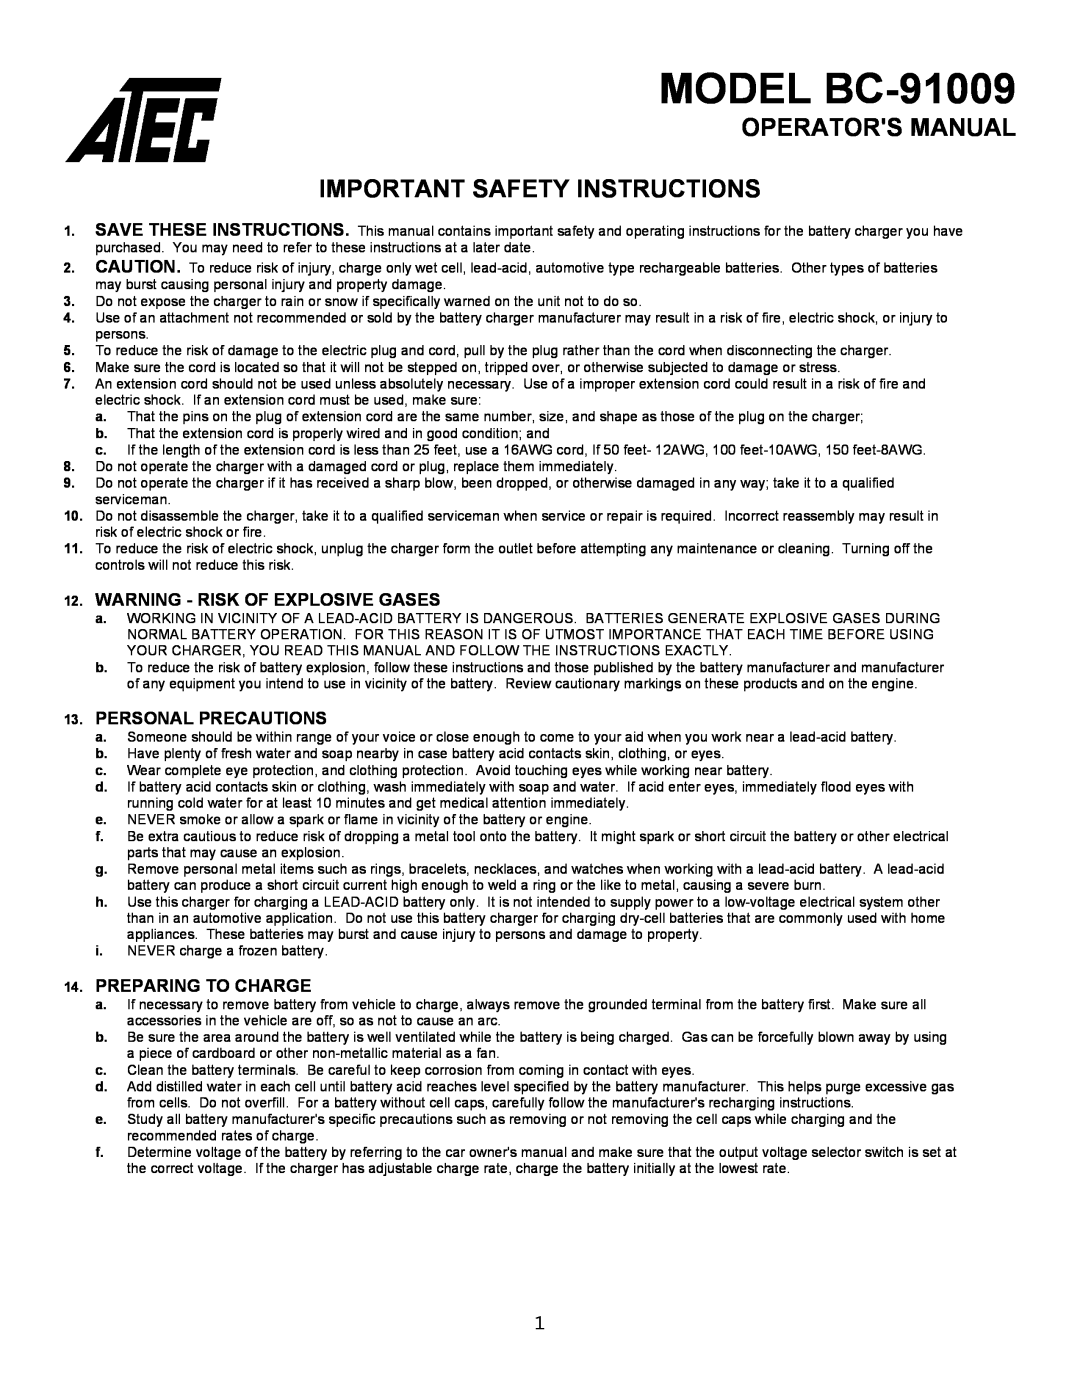 Atec manual Warning - Risk Of Explosive Gases, Personal Precautions, Preparing To Charge, MODEL BC-91009 